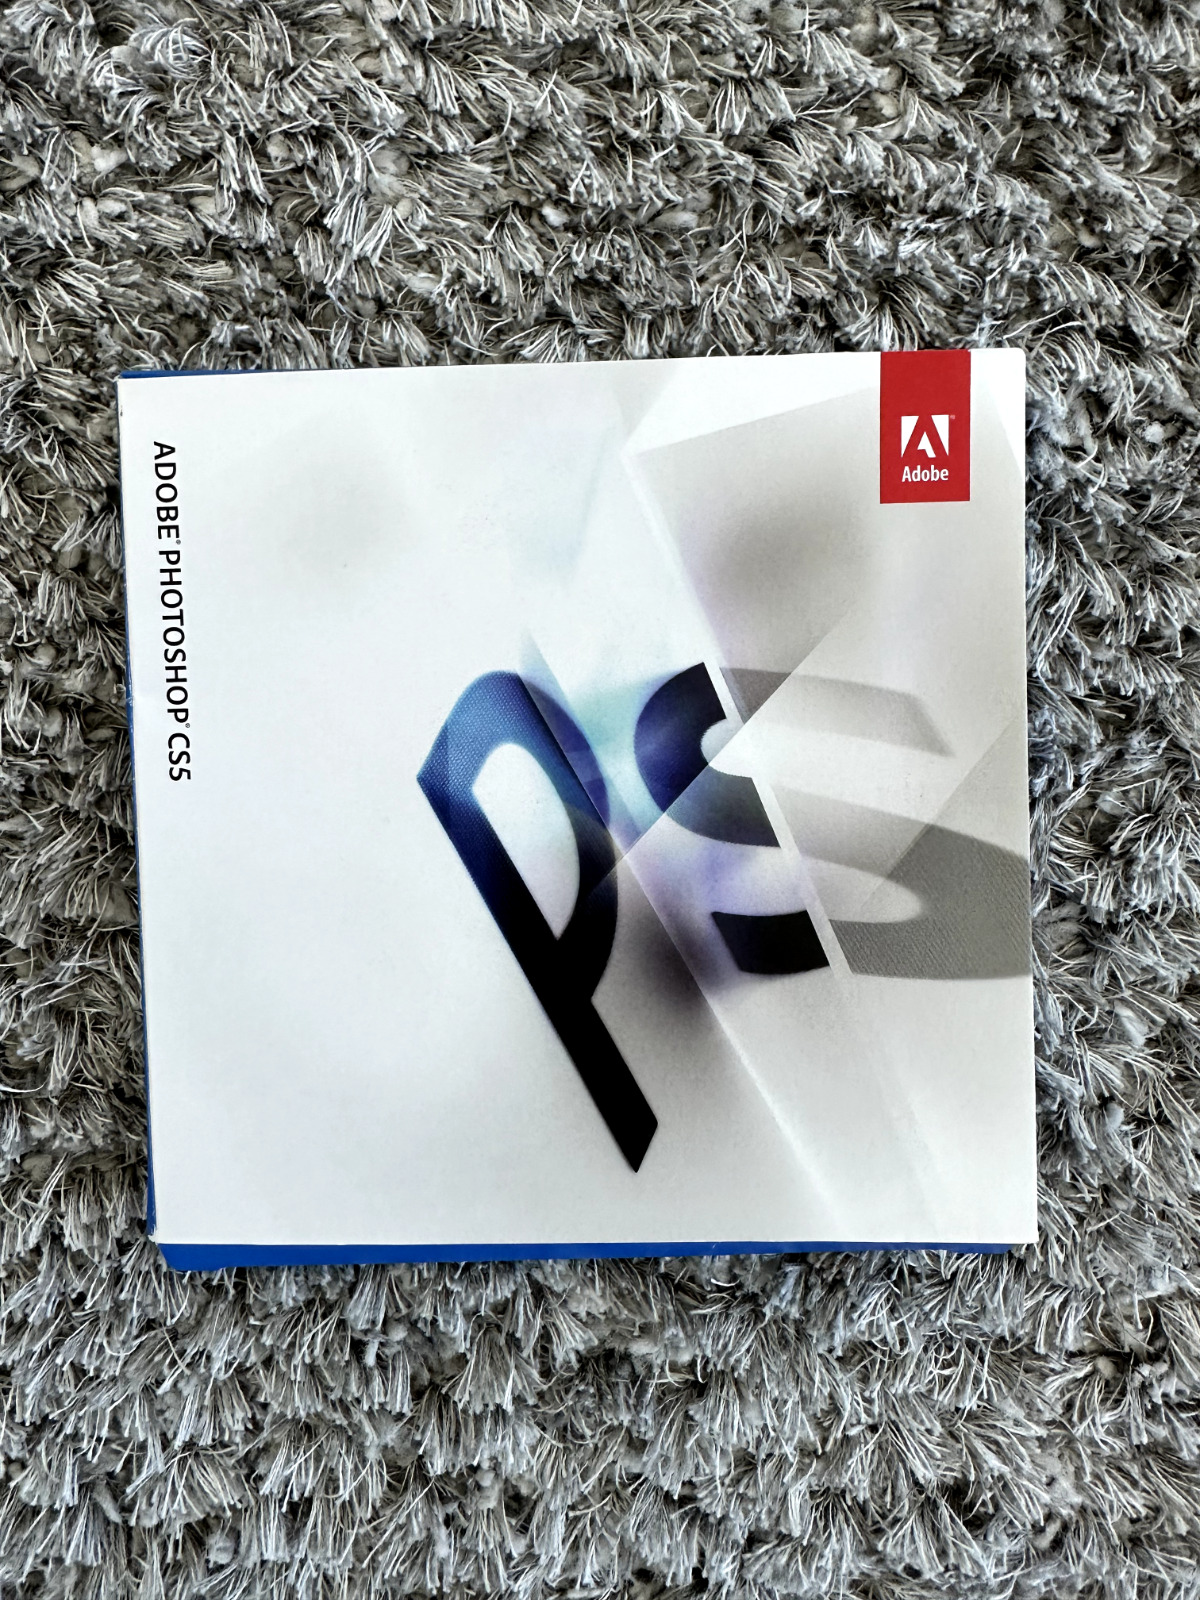 Brand New Adobe Photoshop CS5 for Mac as pictured New with serial number